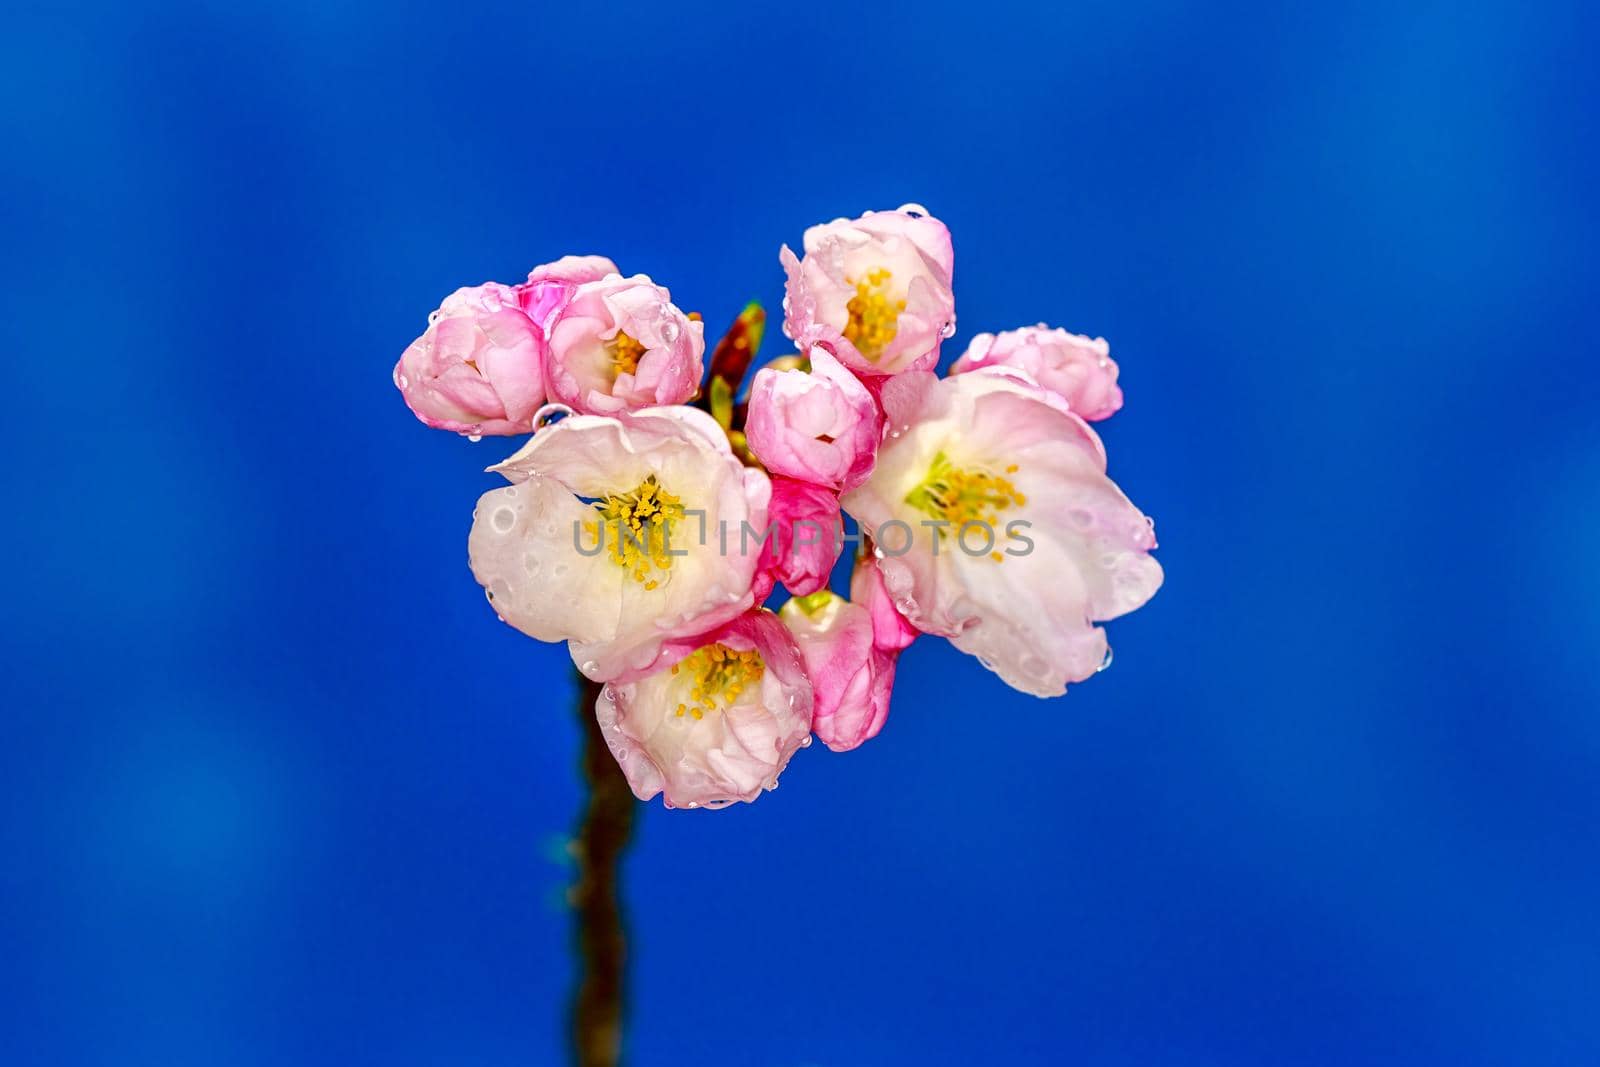 Cherry blossom right after raining by gepeng